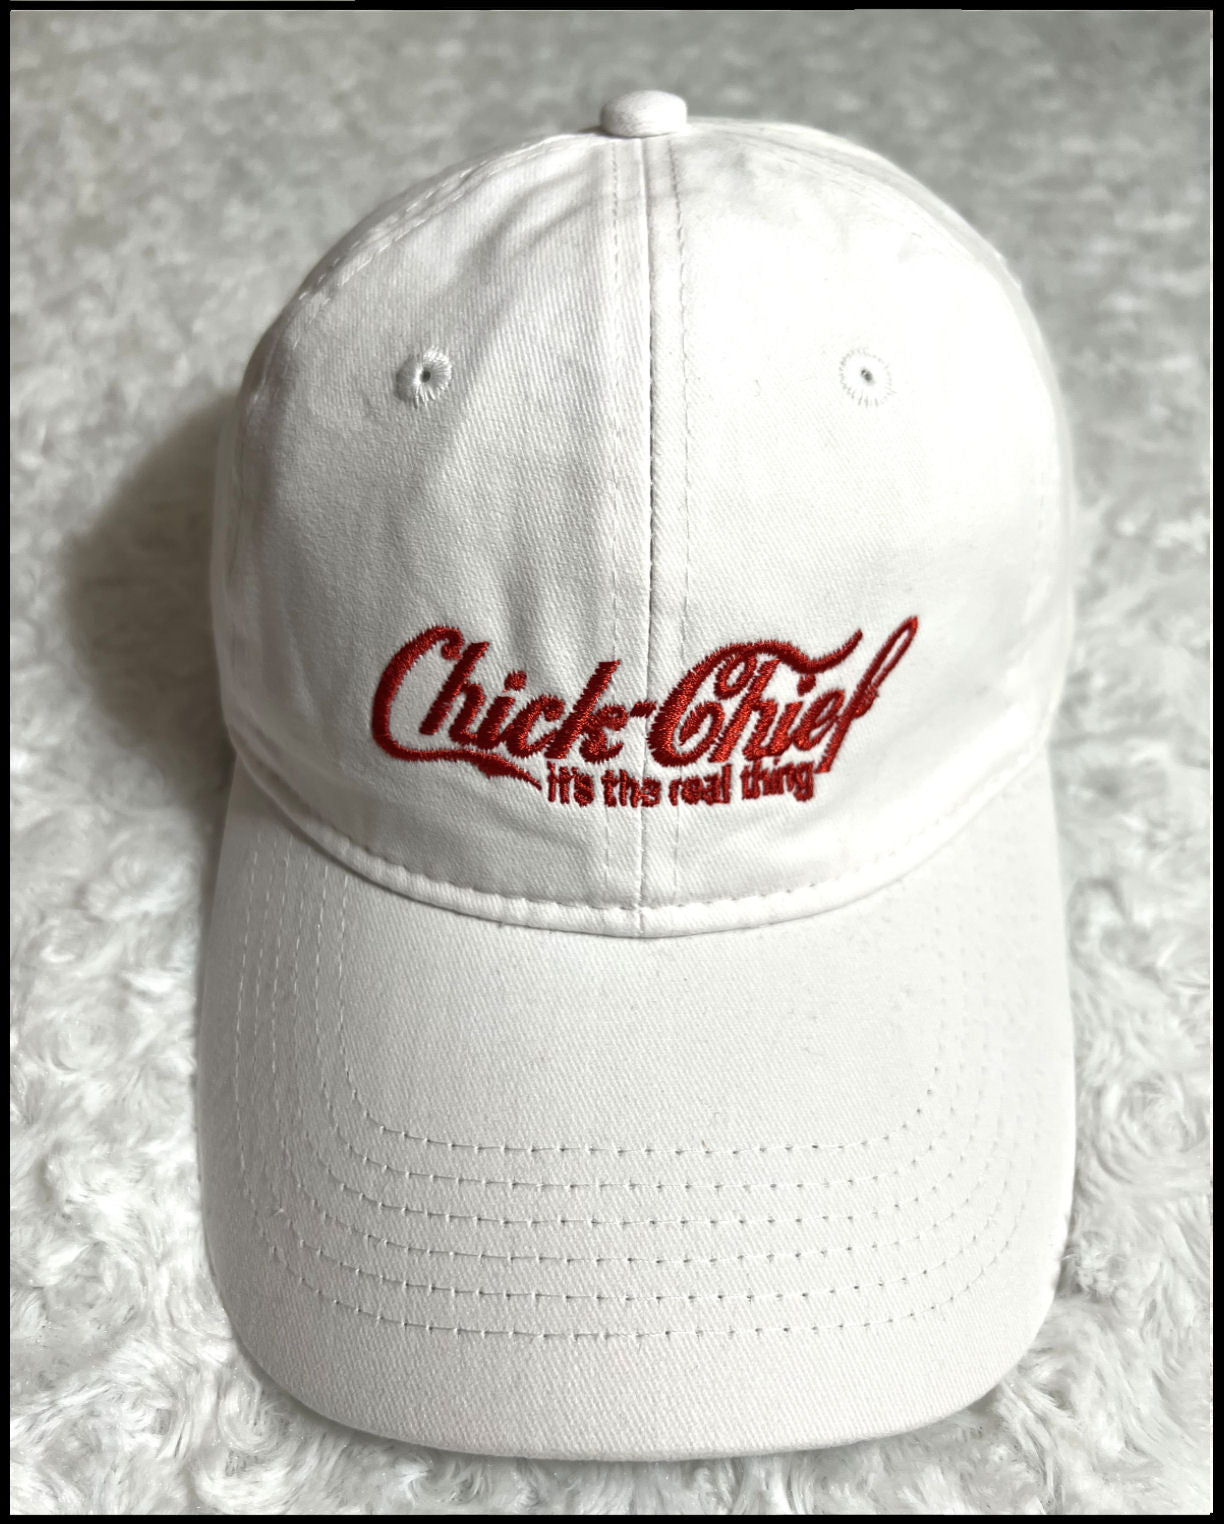 Chick Chief White & Red Hat